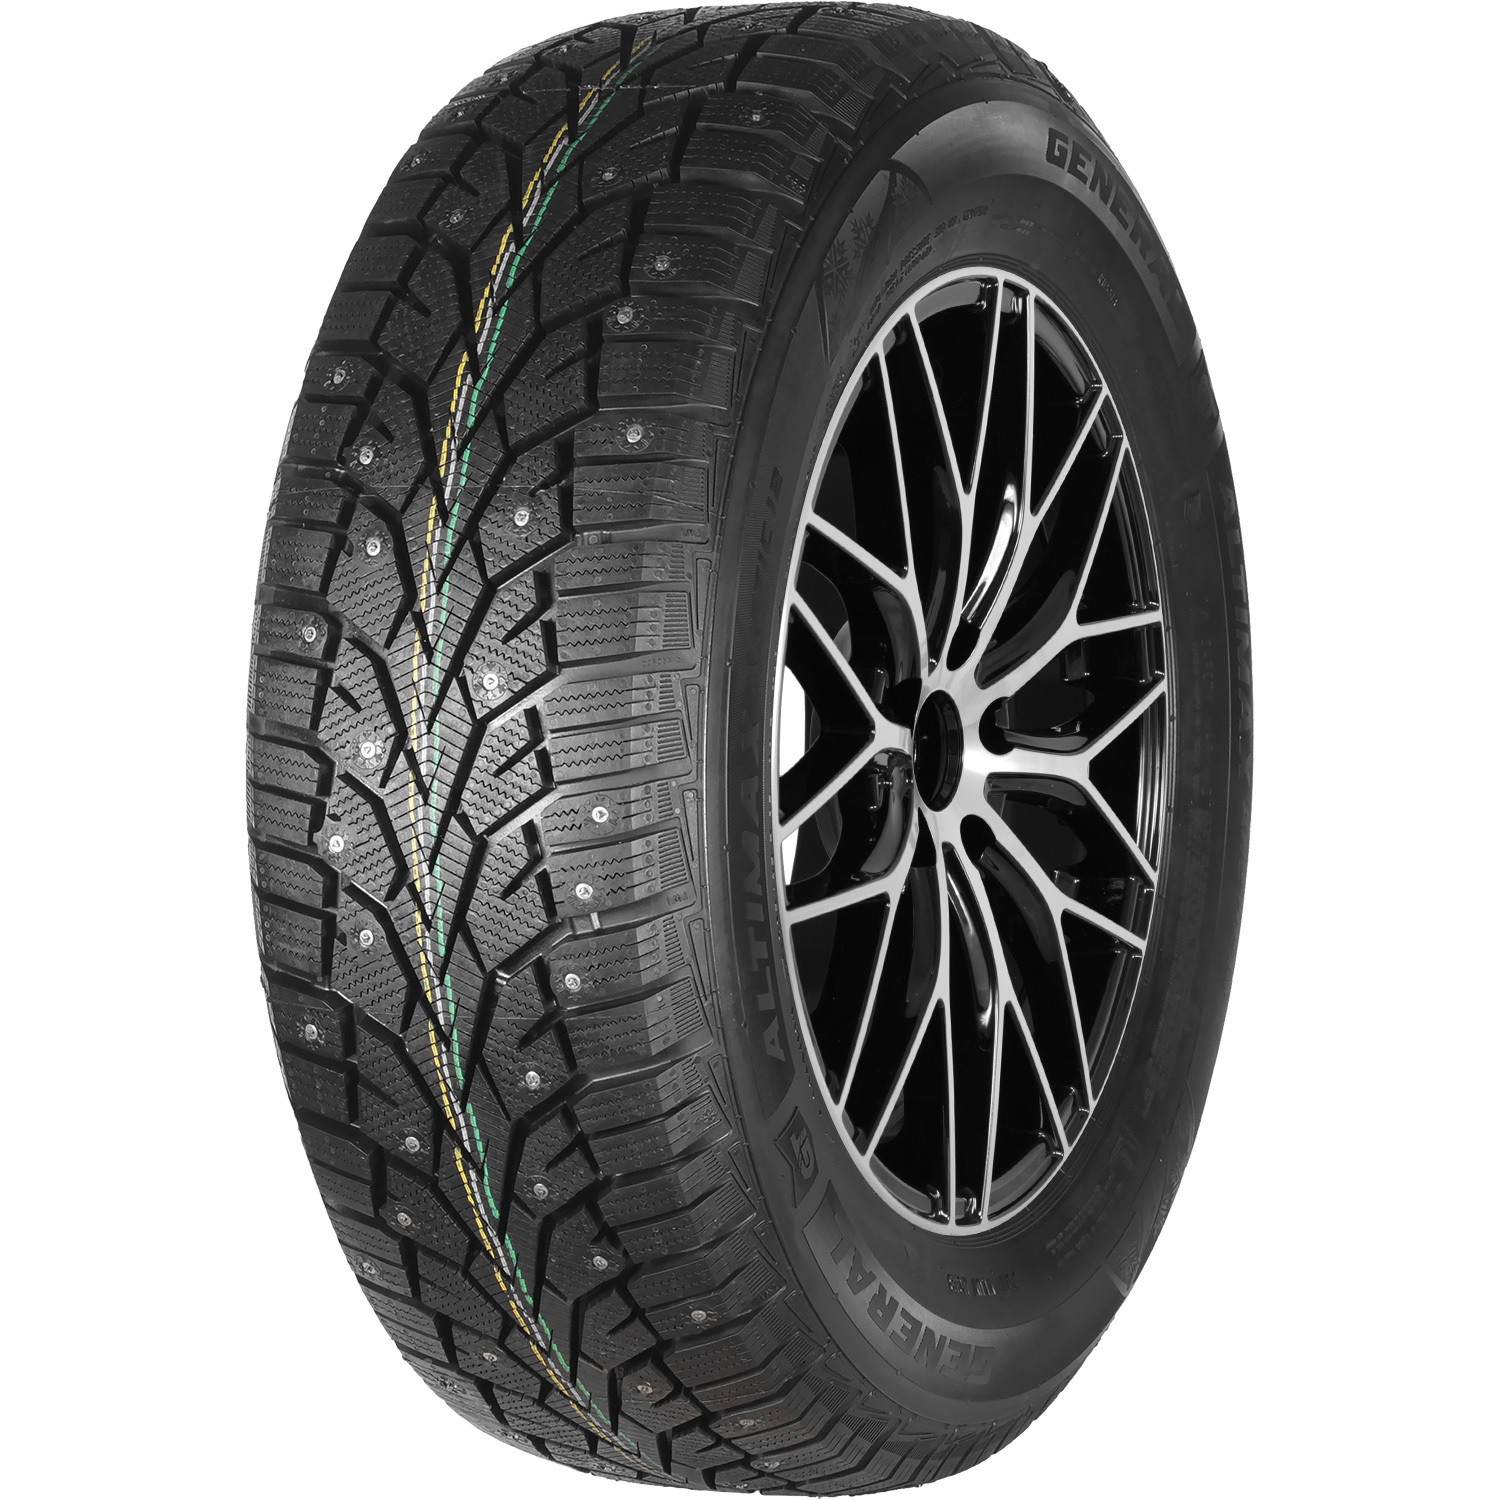 Автомобильная шина General Tire Altimax Arctic 12 225/65 R17 106T Шипованные camping spare tire cover car accessories custom spare tire covers your own personalized design tire protectors